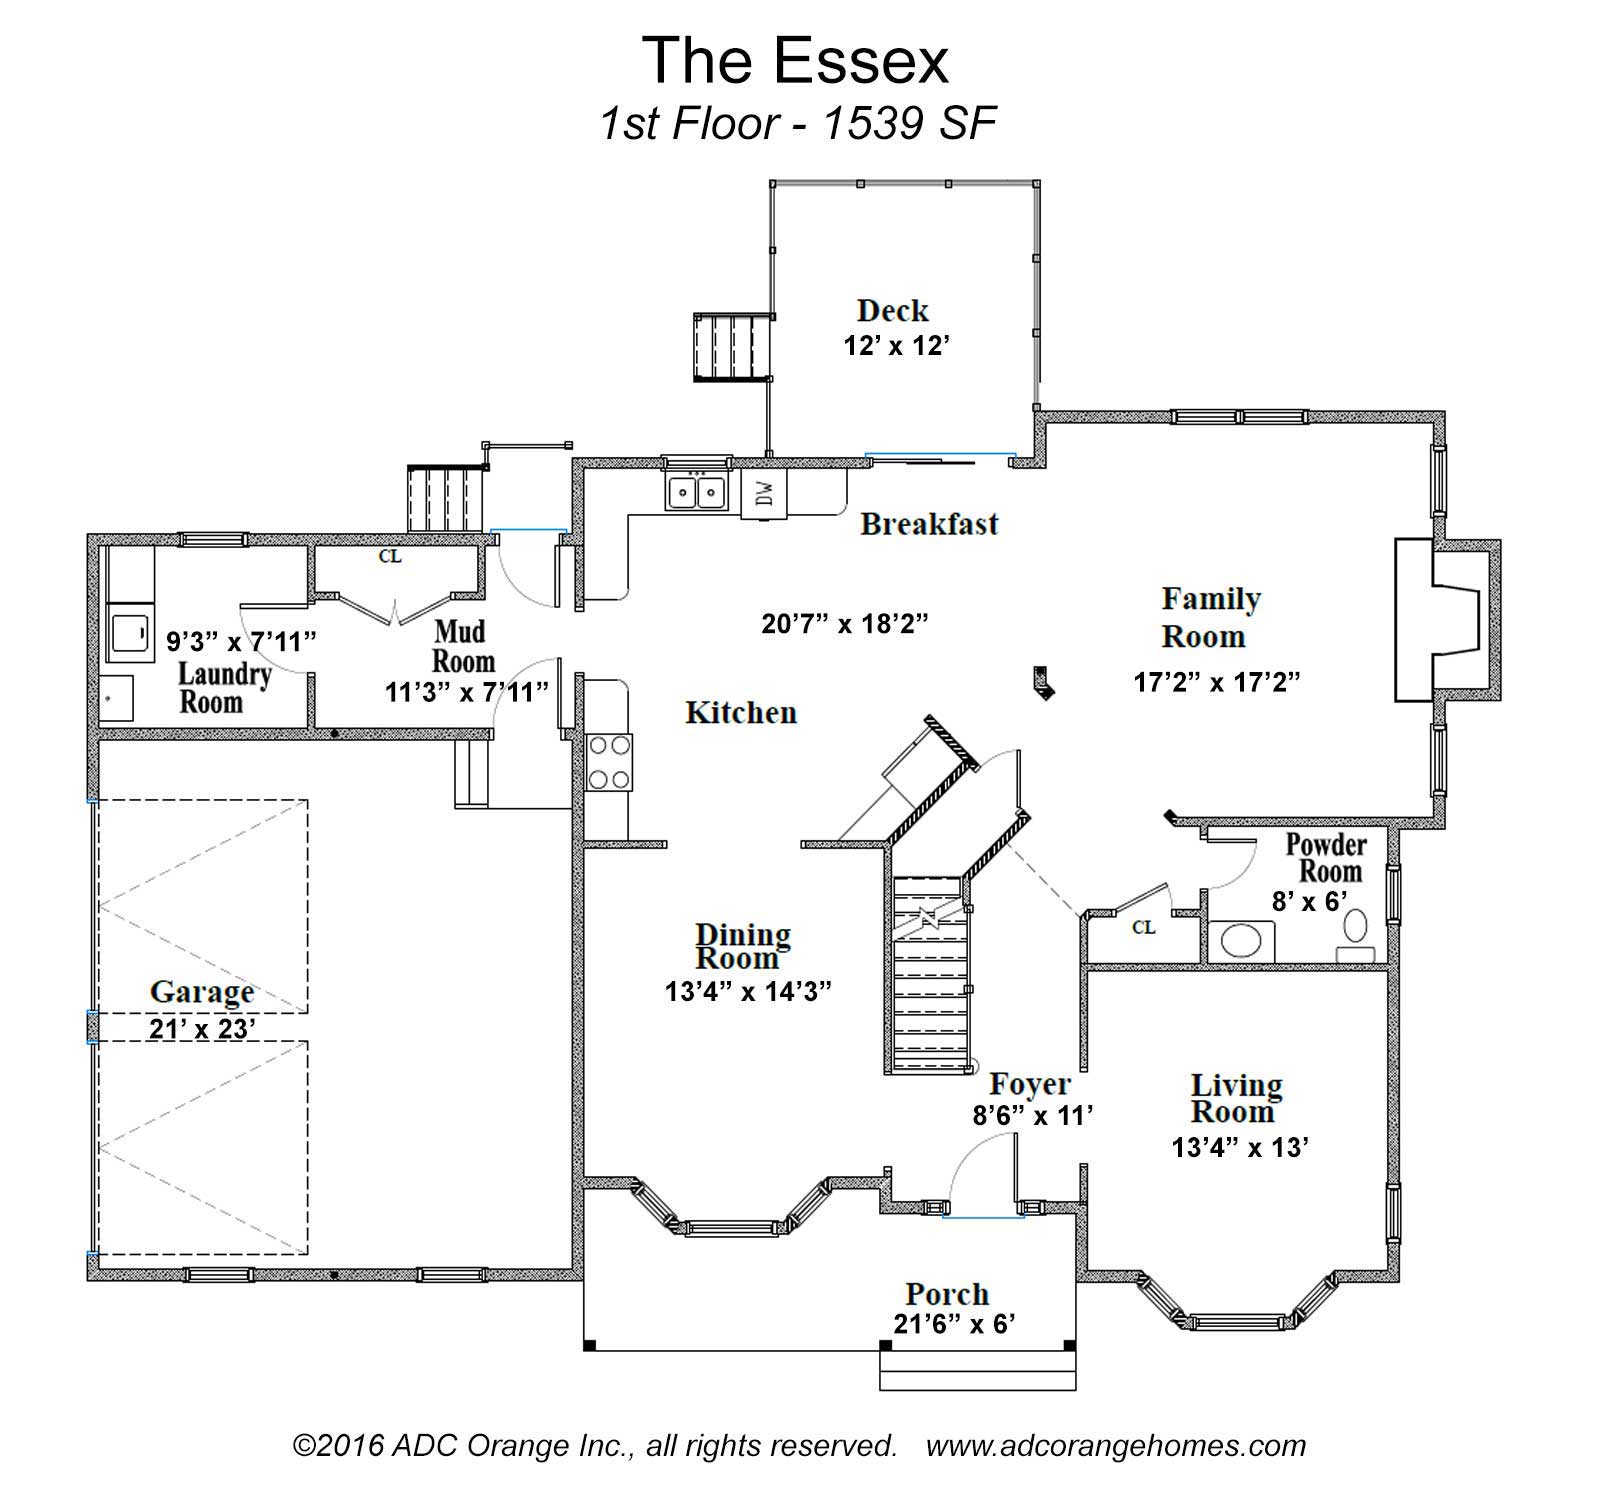 1st Floor Plan for Essex - New Home in Orange County, New York